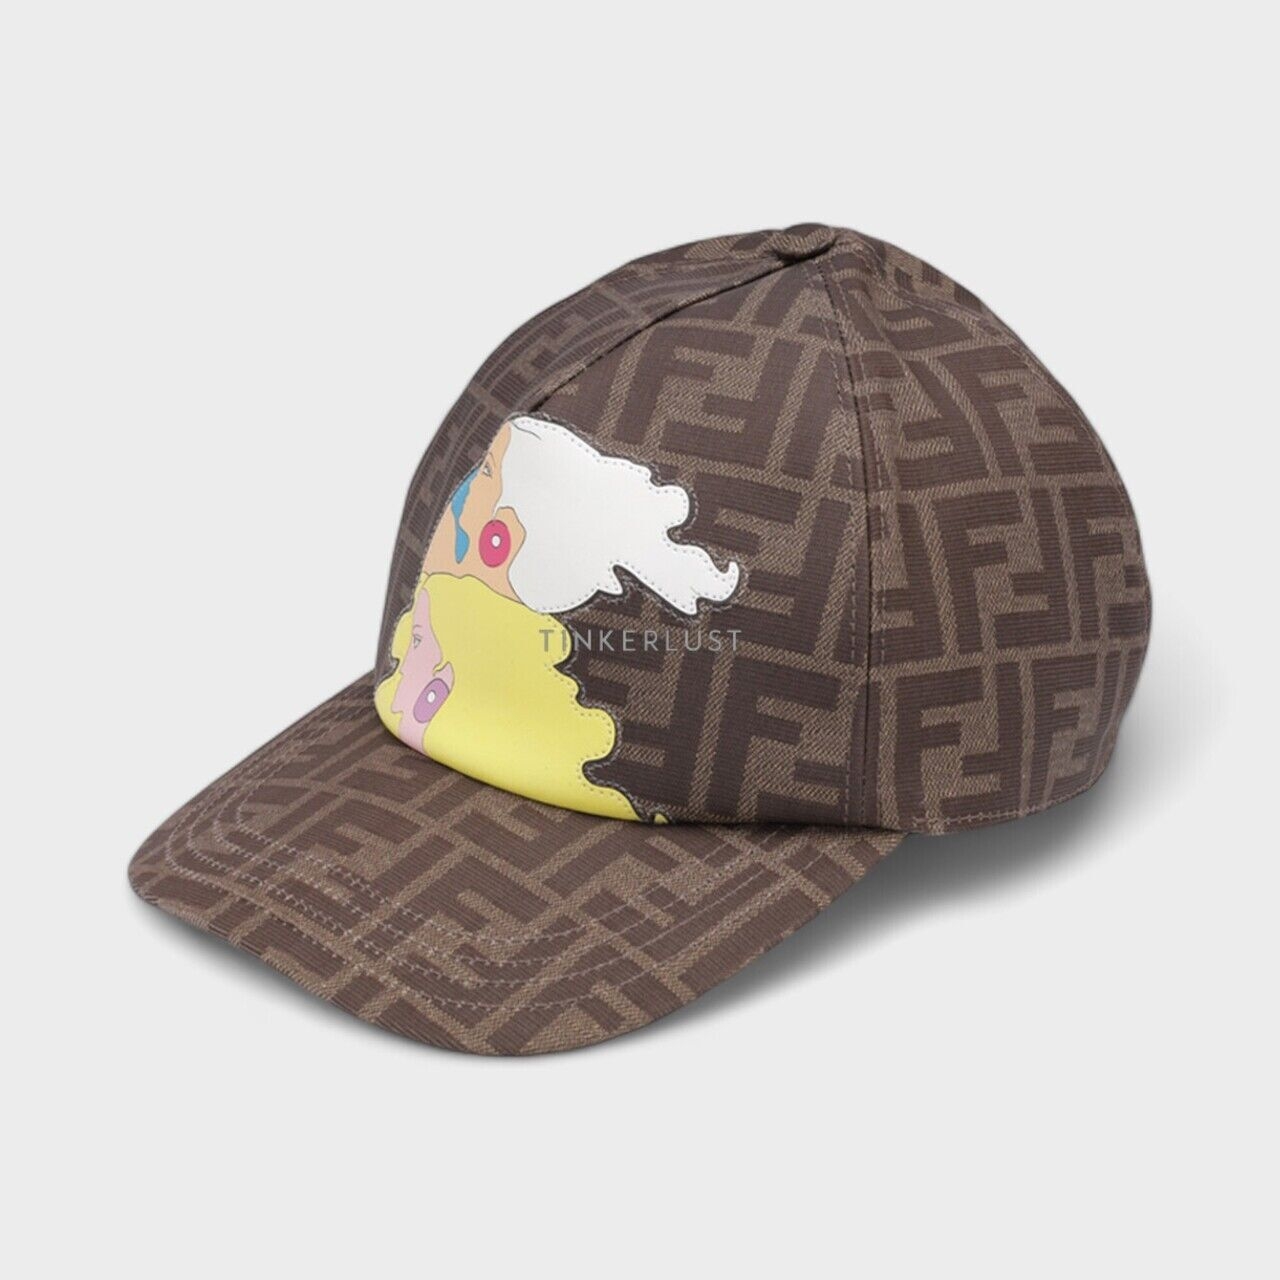 Fendi All Over FF Logo Baseball Cap in Brown/Tobacco with The Hairdo Girls Graphics